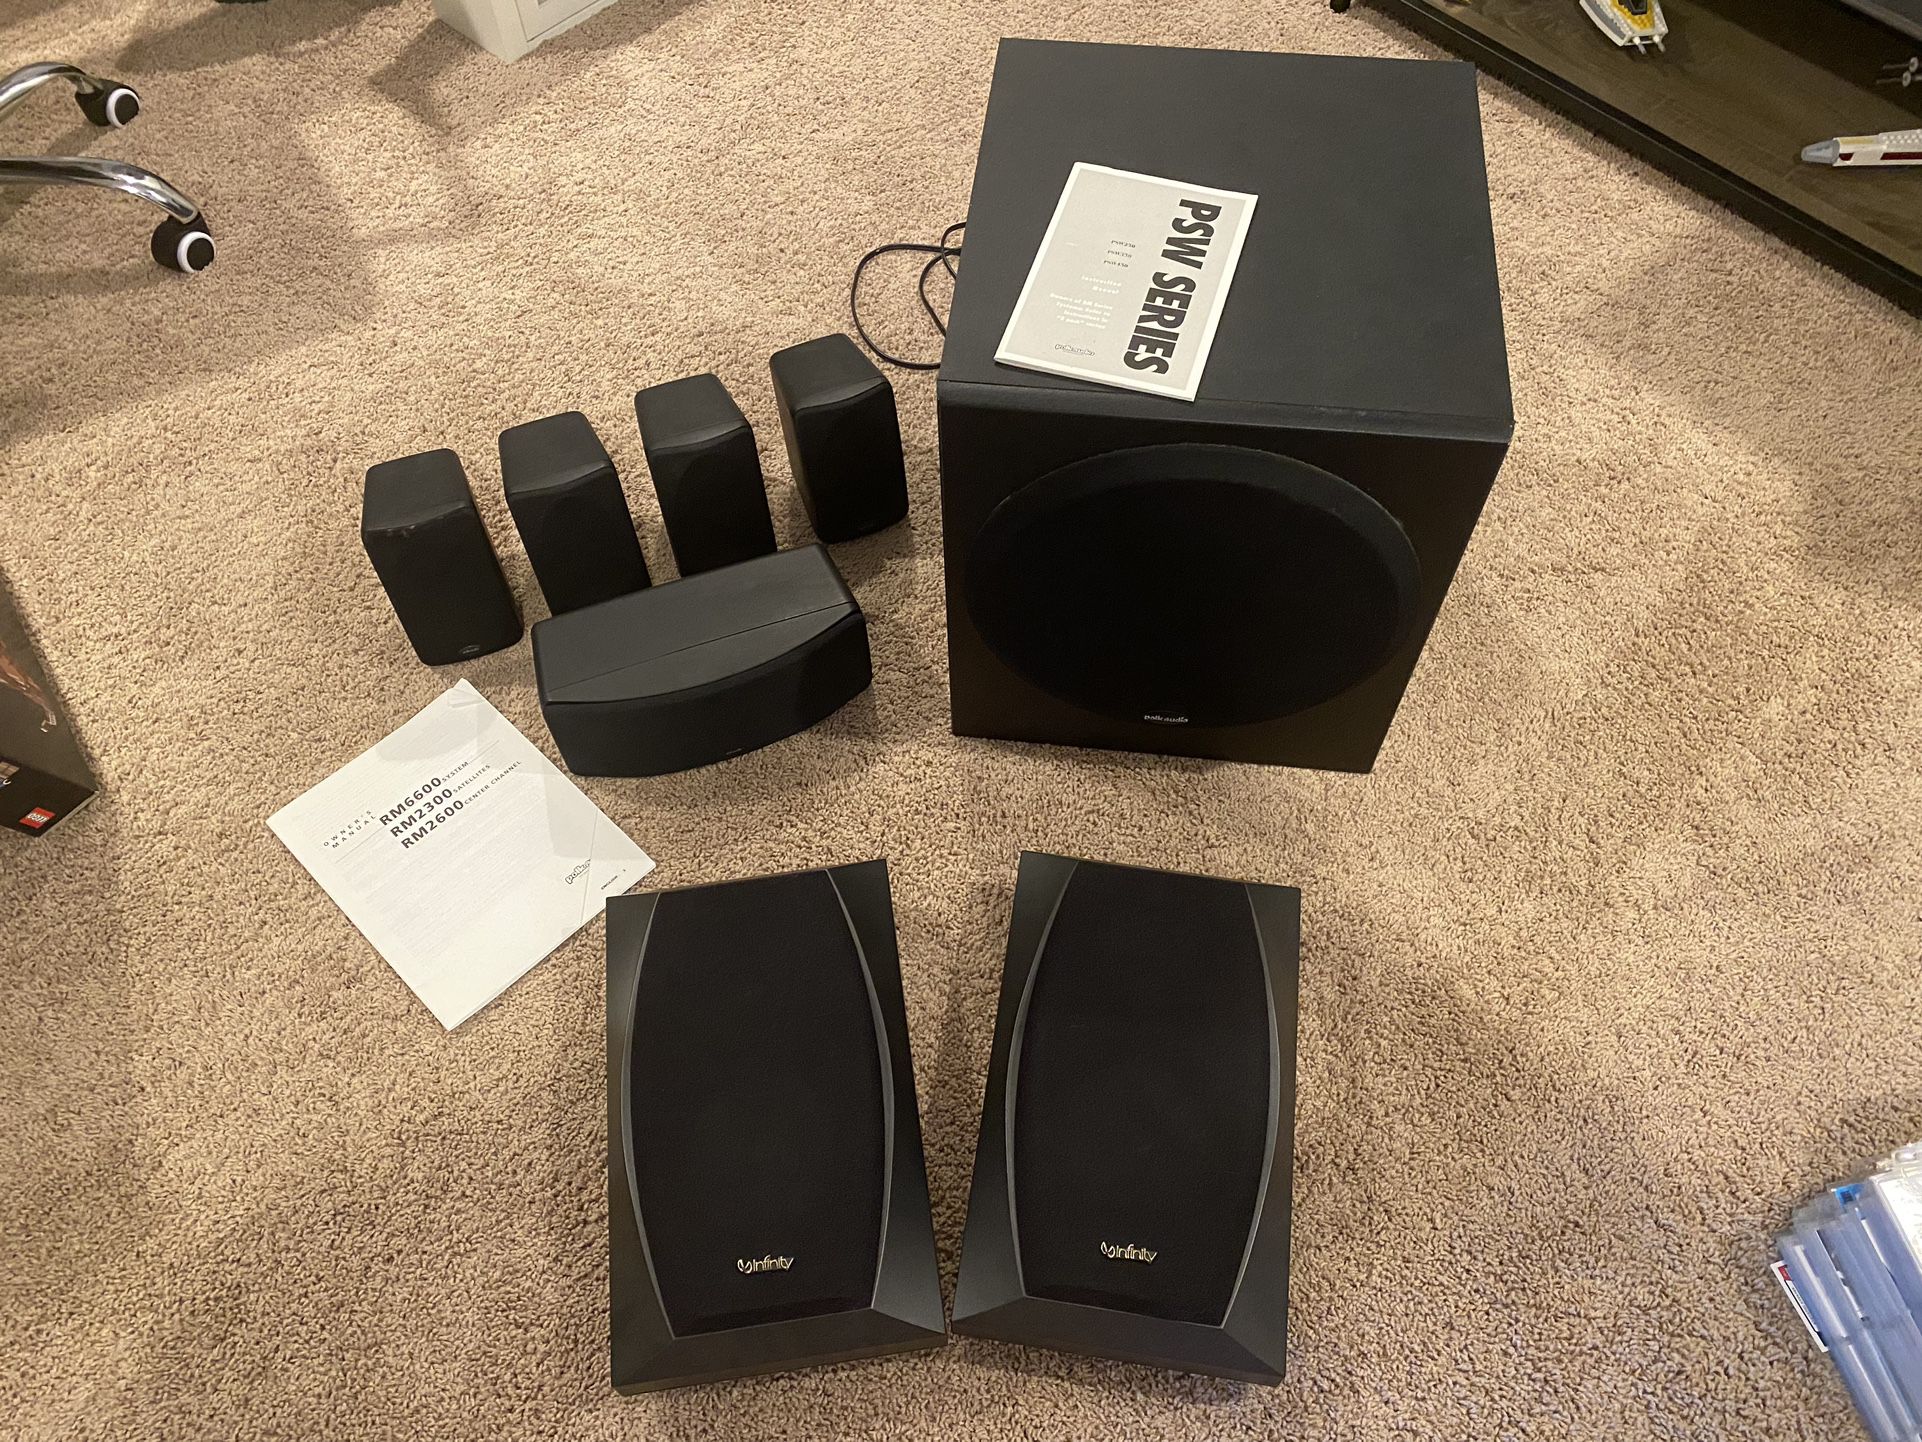 Polk audio And Infinity Speaker Lot!!! Great Shape With Manuals!!!